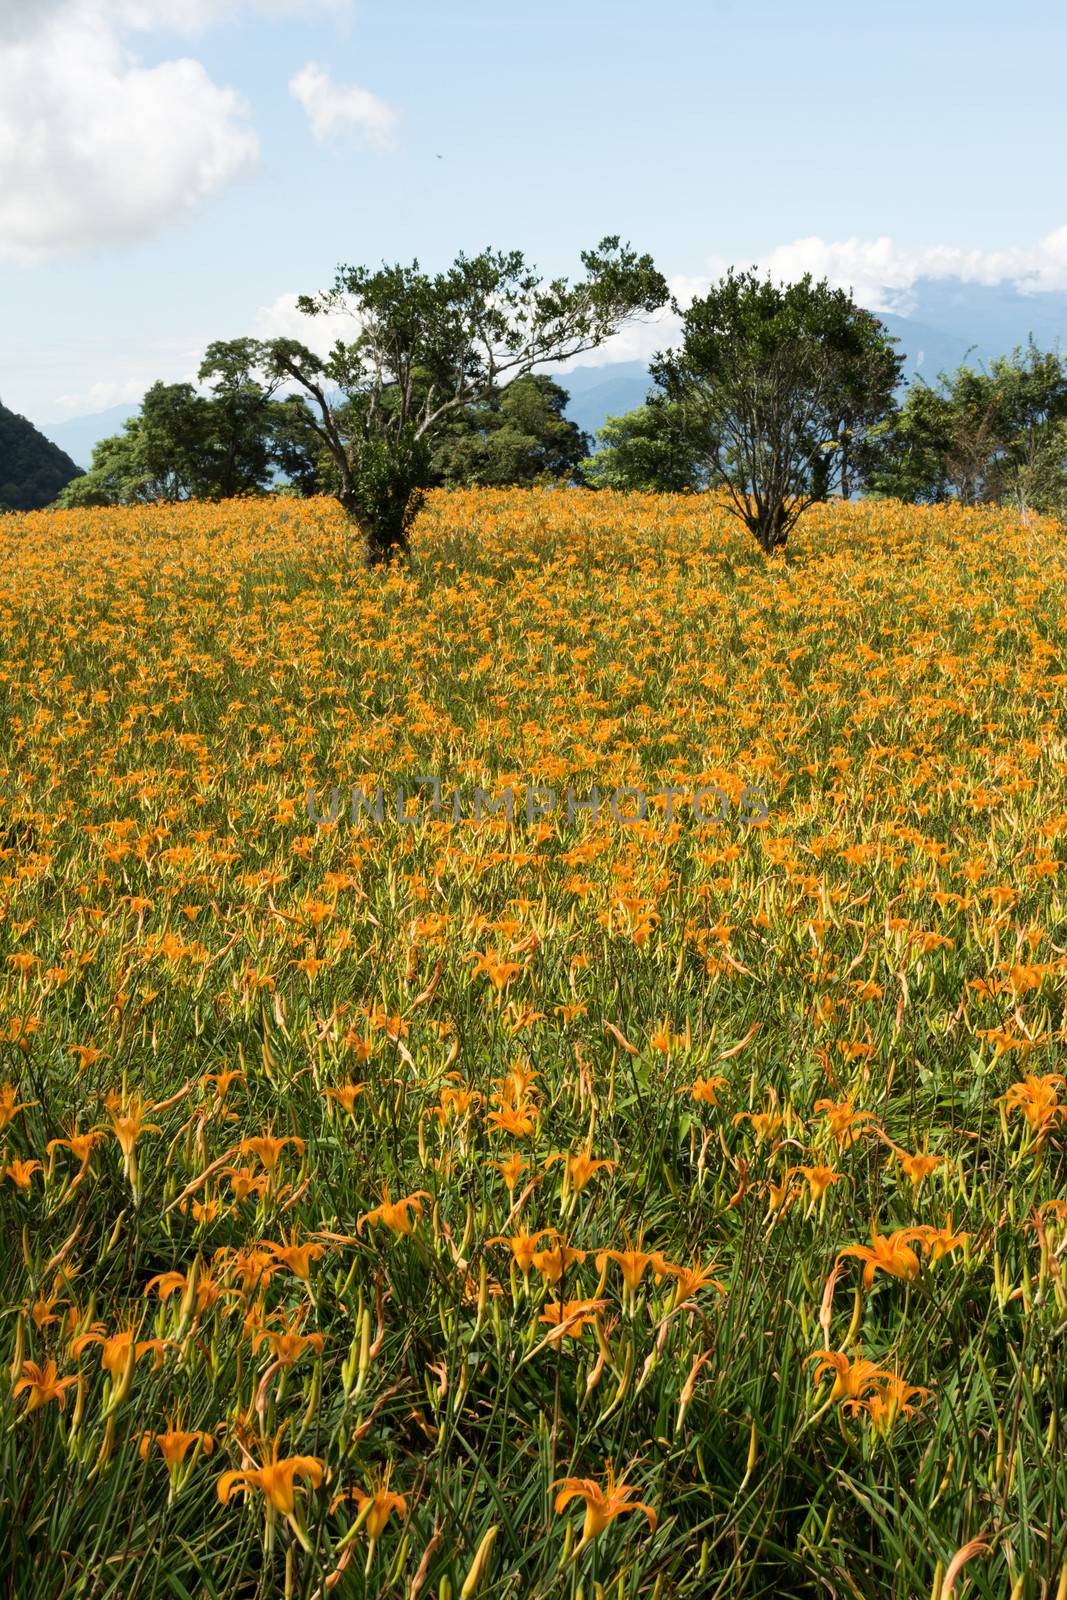 Field of tiger lily flowers.